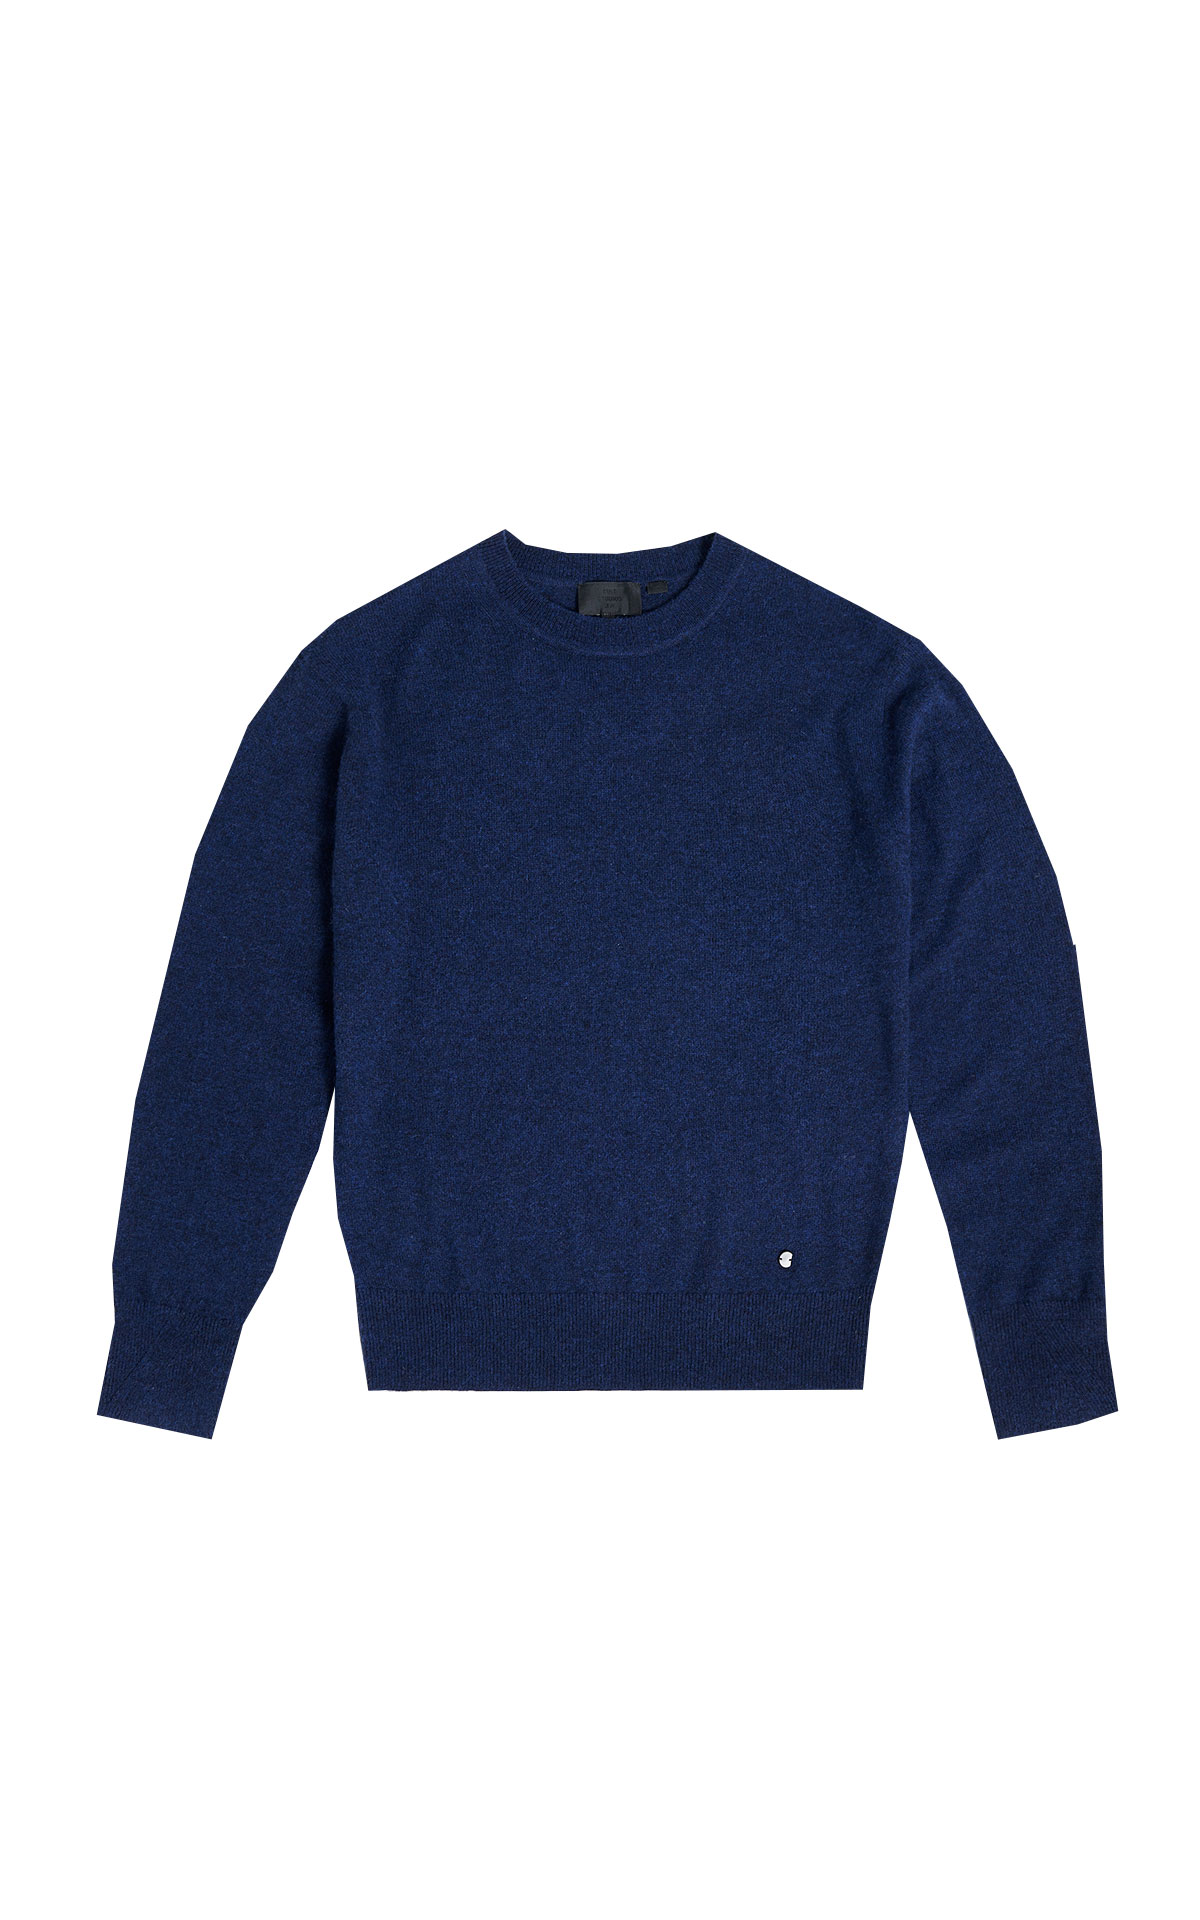 Navy blue sweater Superdry